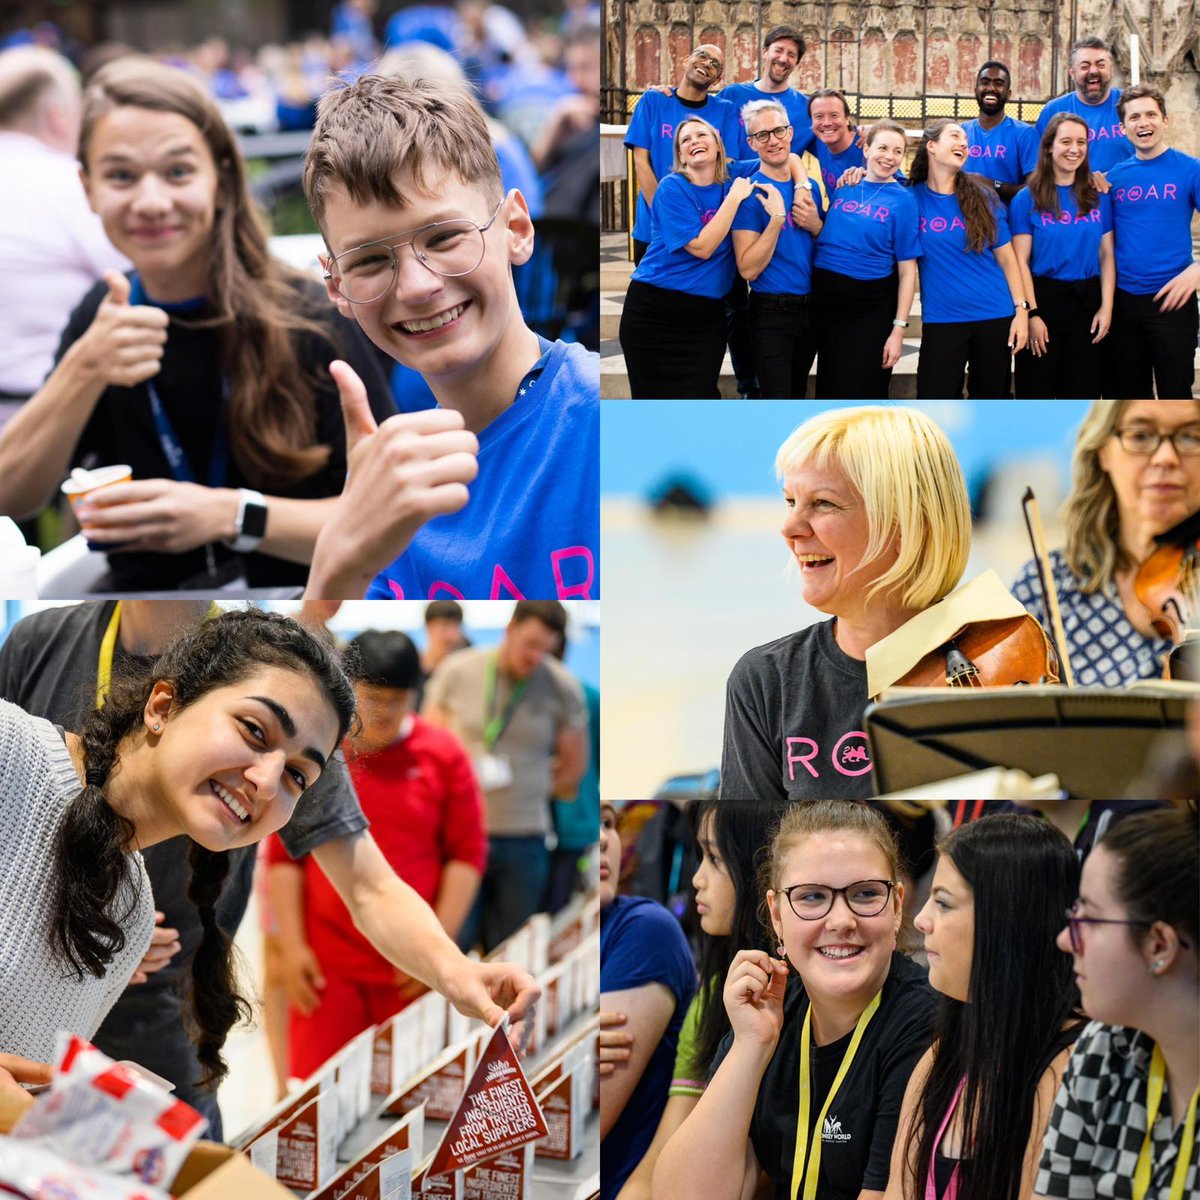 Look at these smiley people from our residential courses! We can't wait to see familiar faces & welcome new young singers to Roar. Sign up today: bit.ly/3I6TPWg 📆19 - 24 July 🎼 Verdi Requiem at @ElyCathedral 💰 £275 pp (bursaries available) 🥳 Lots of fun - 100%!